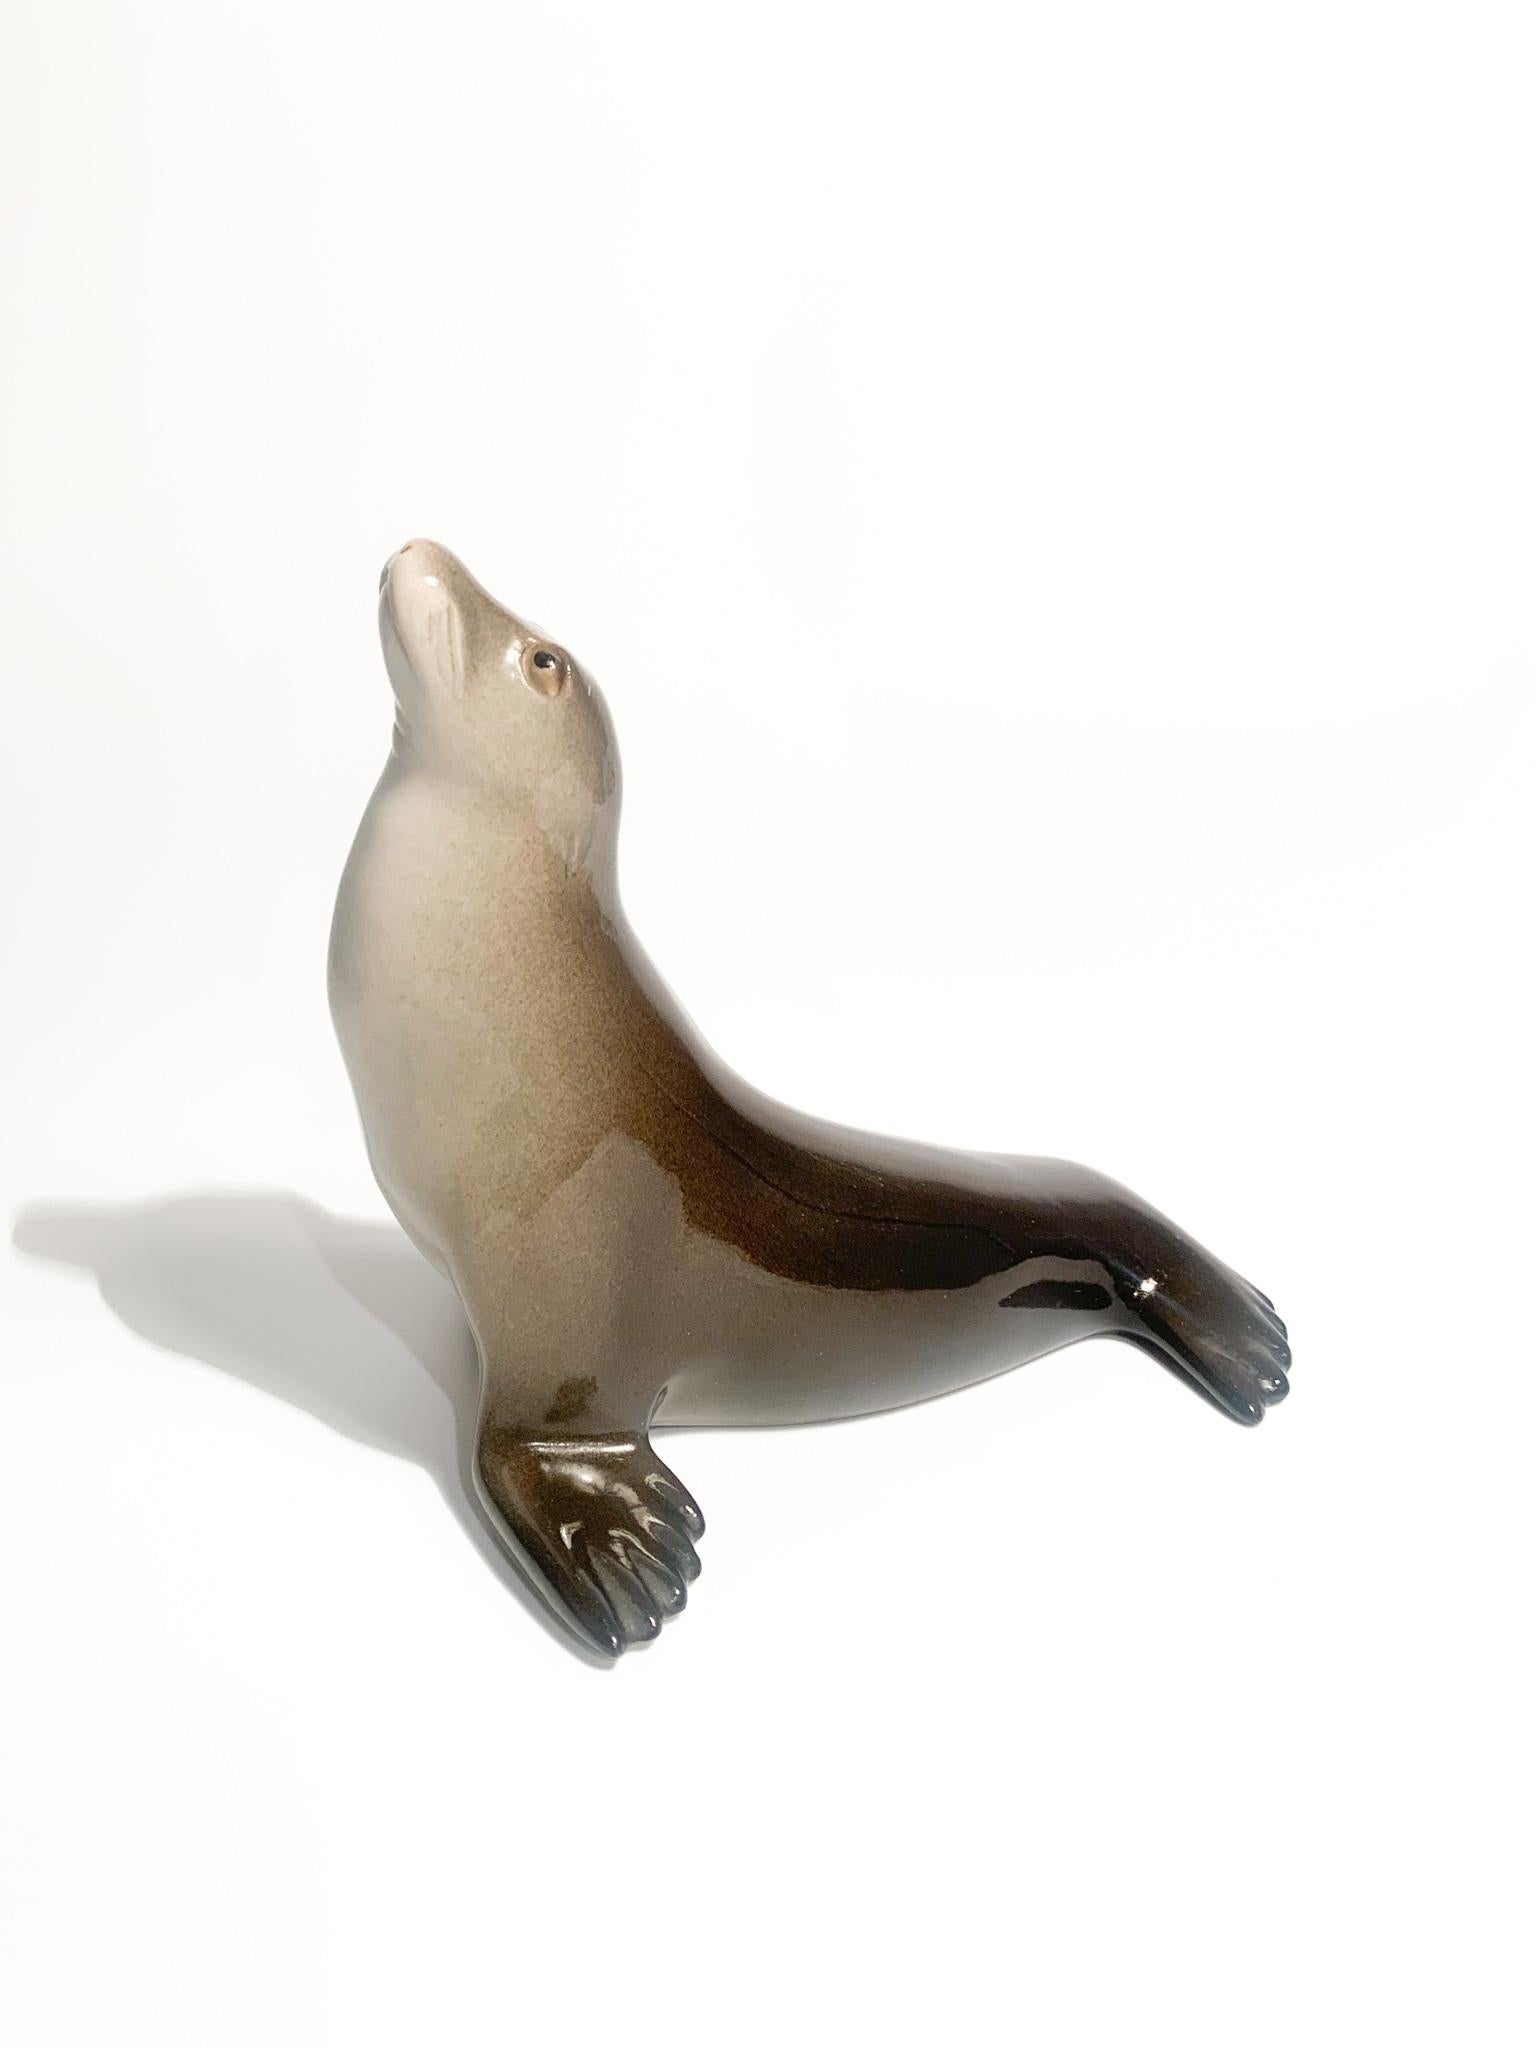 Mid-20th Century URSS Ceramic Sculpture of a Seal from the 1940s For Sale